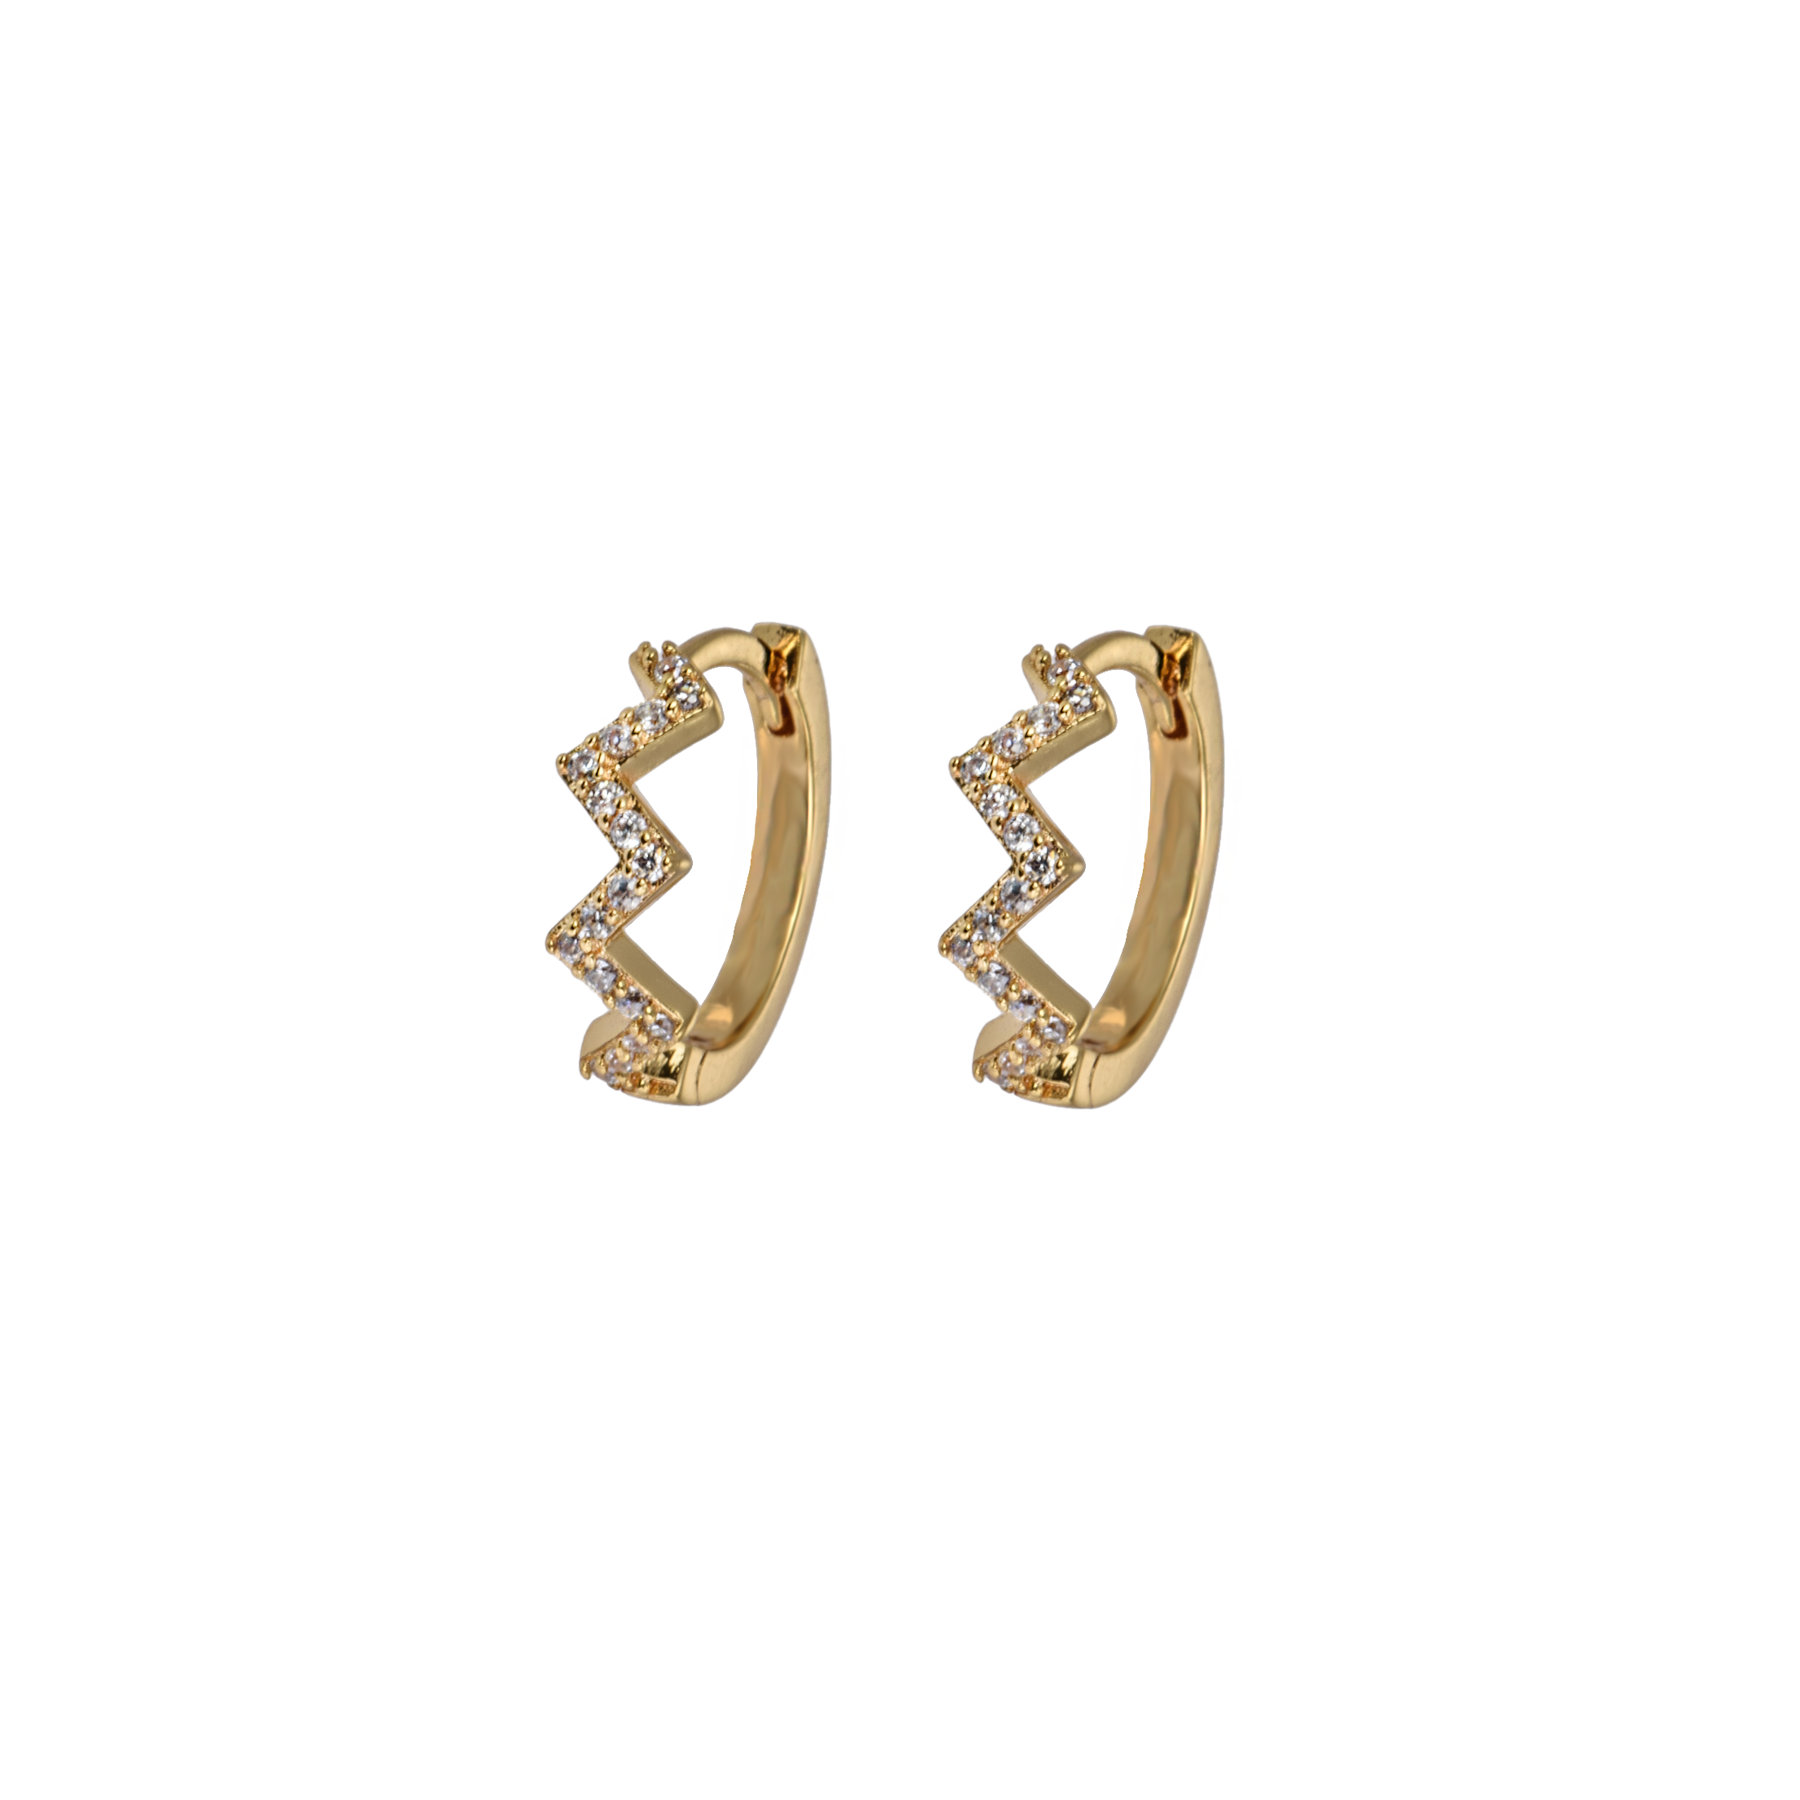 Image of Small zigzag hoops from Emilia by Bon Dep